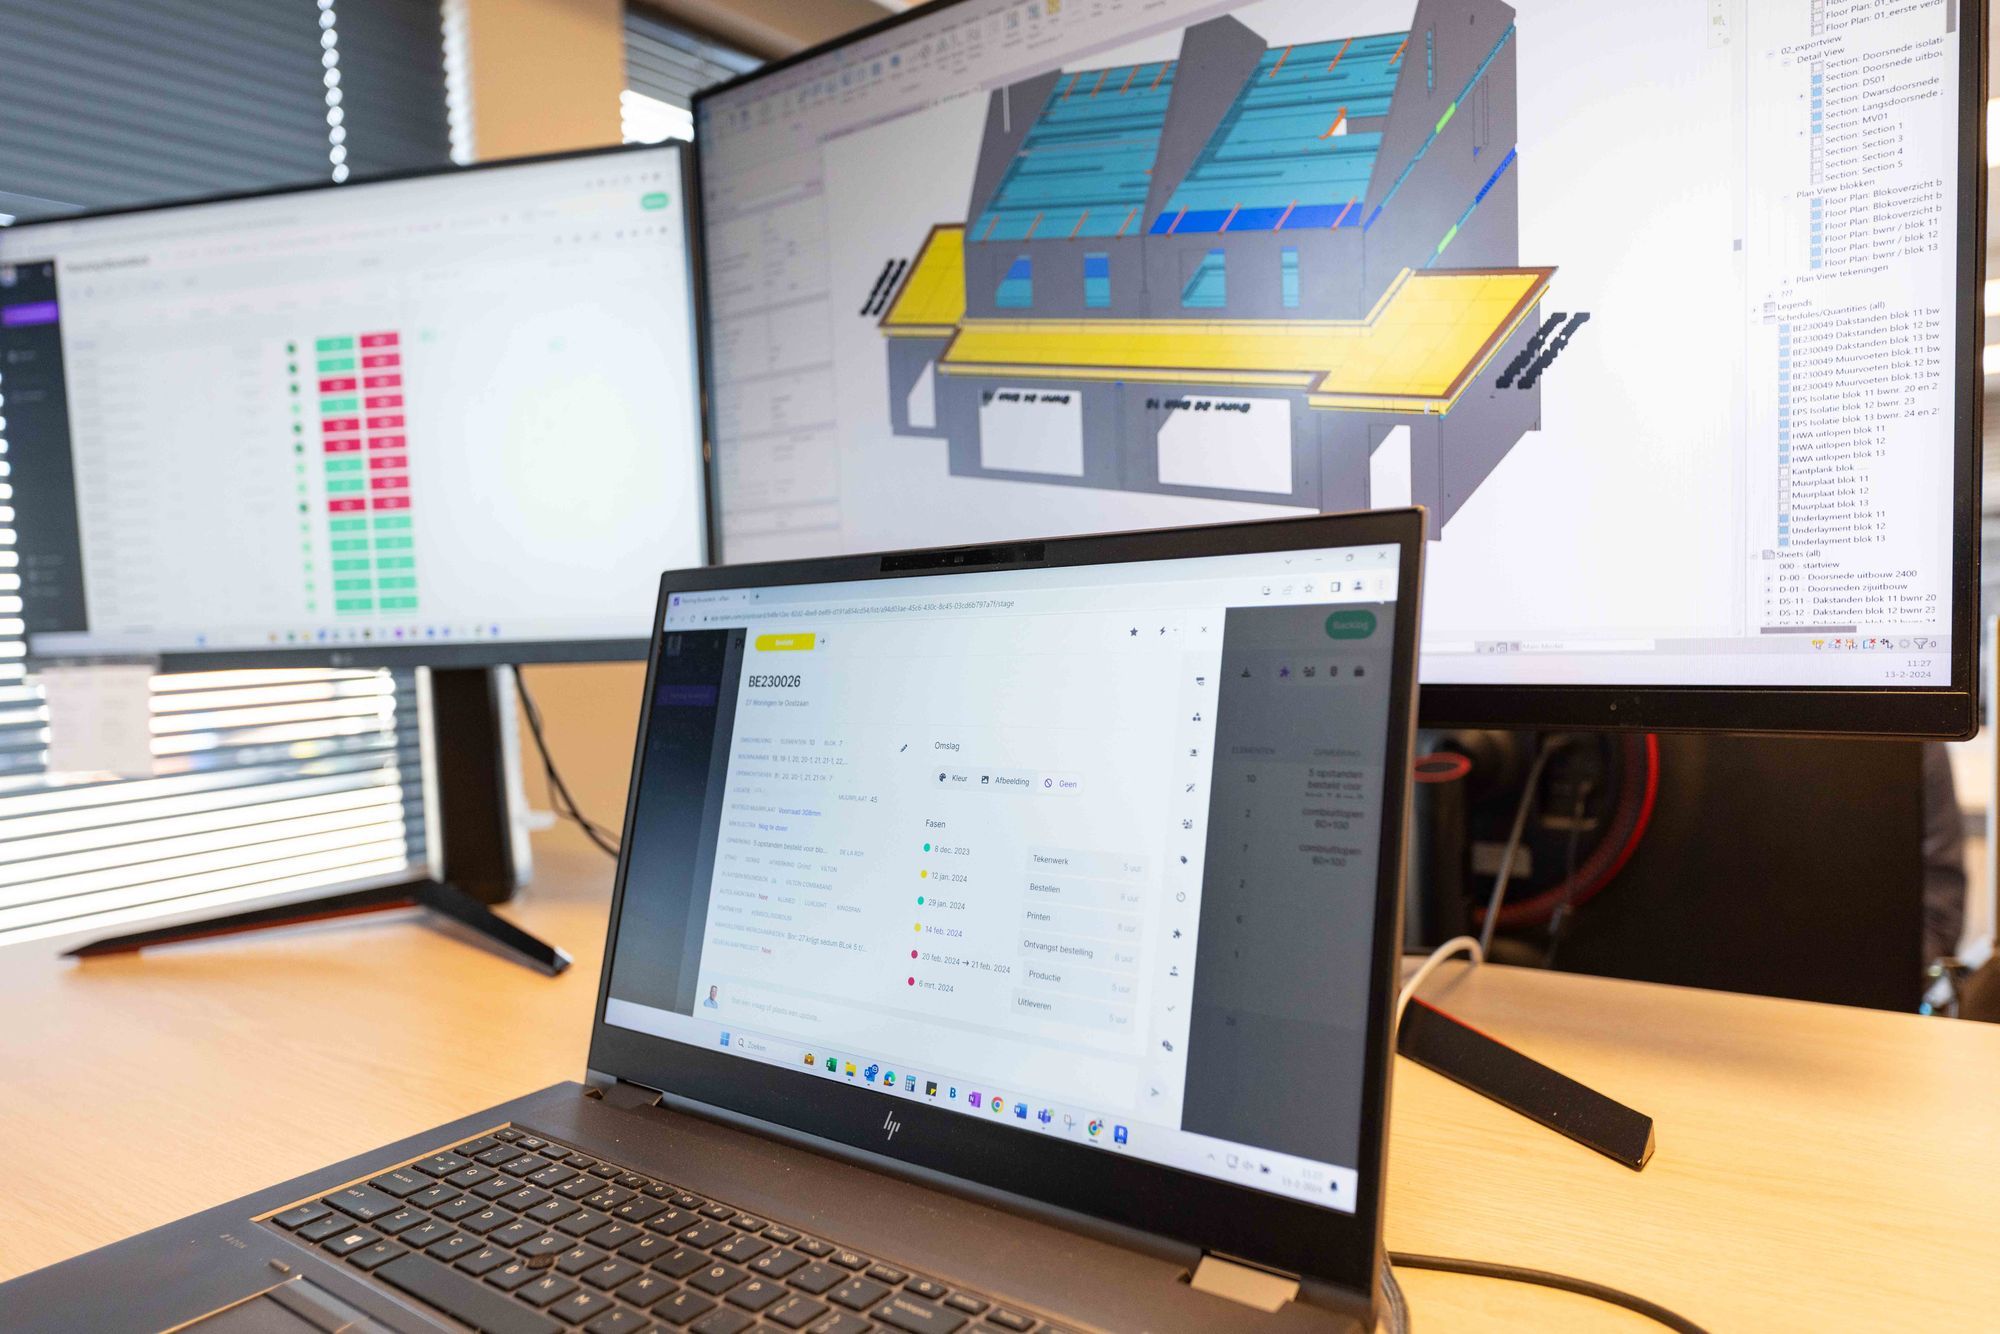 Bouwdeck deploys vPlan for planning, production and quality controls